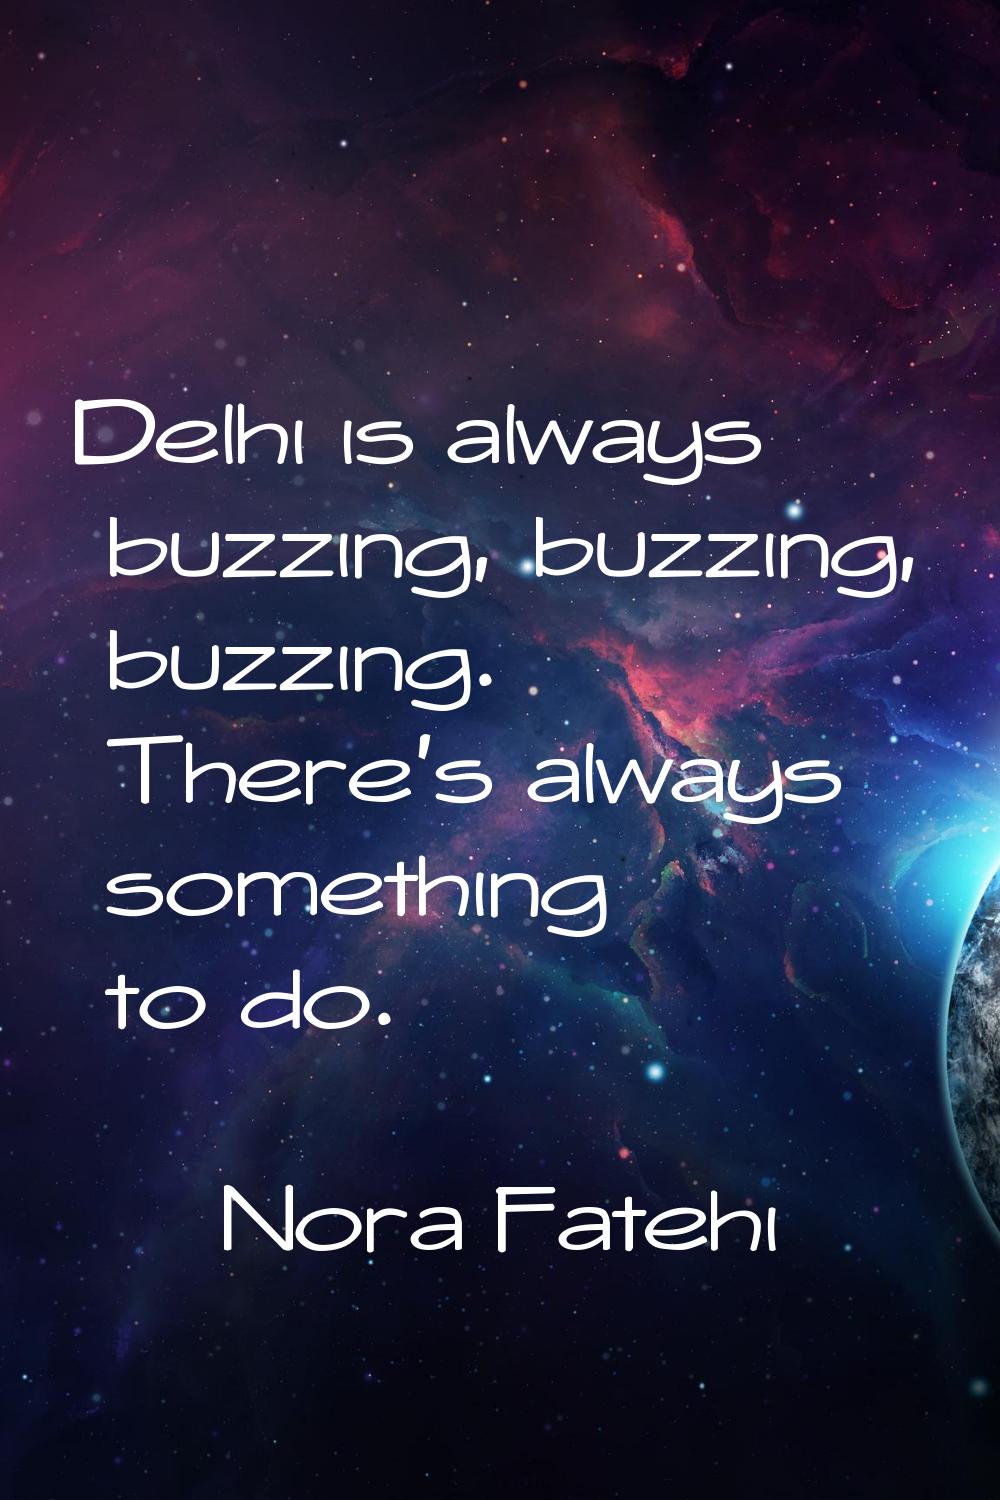 Delhi is always buzzing, buzzing, buzzing. There's always something to do.